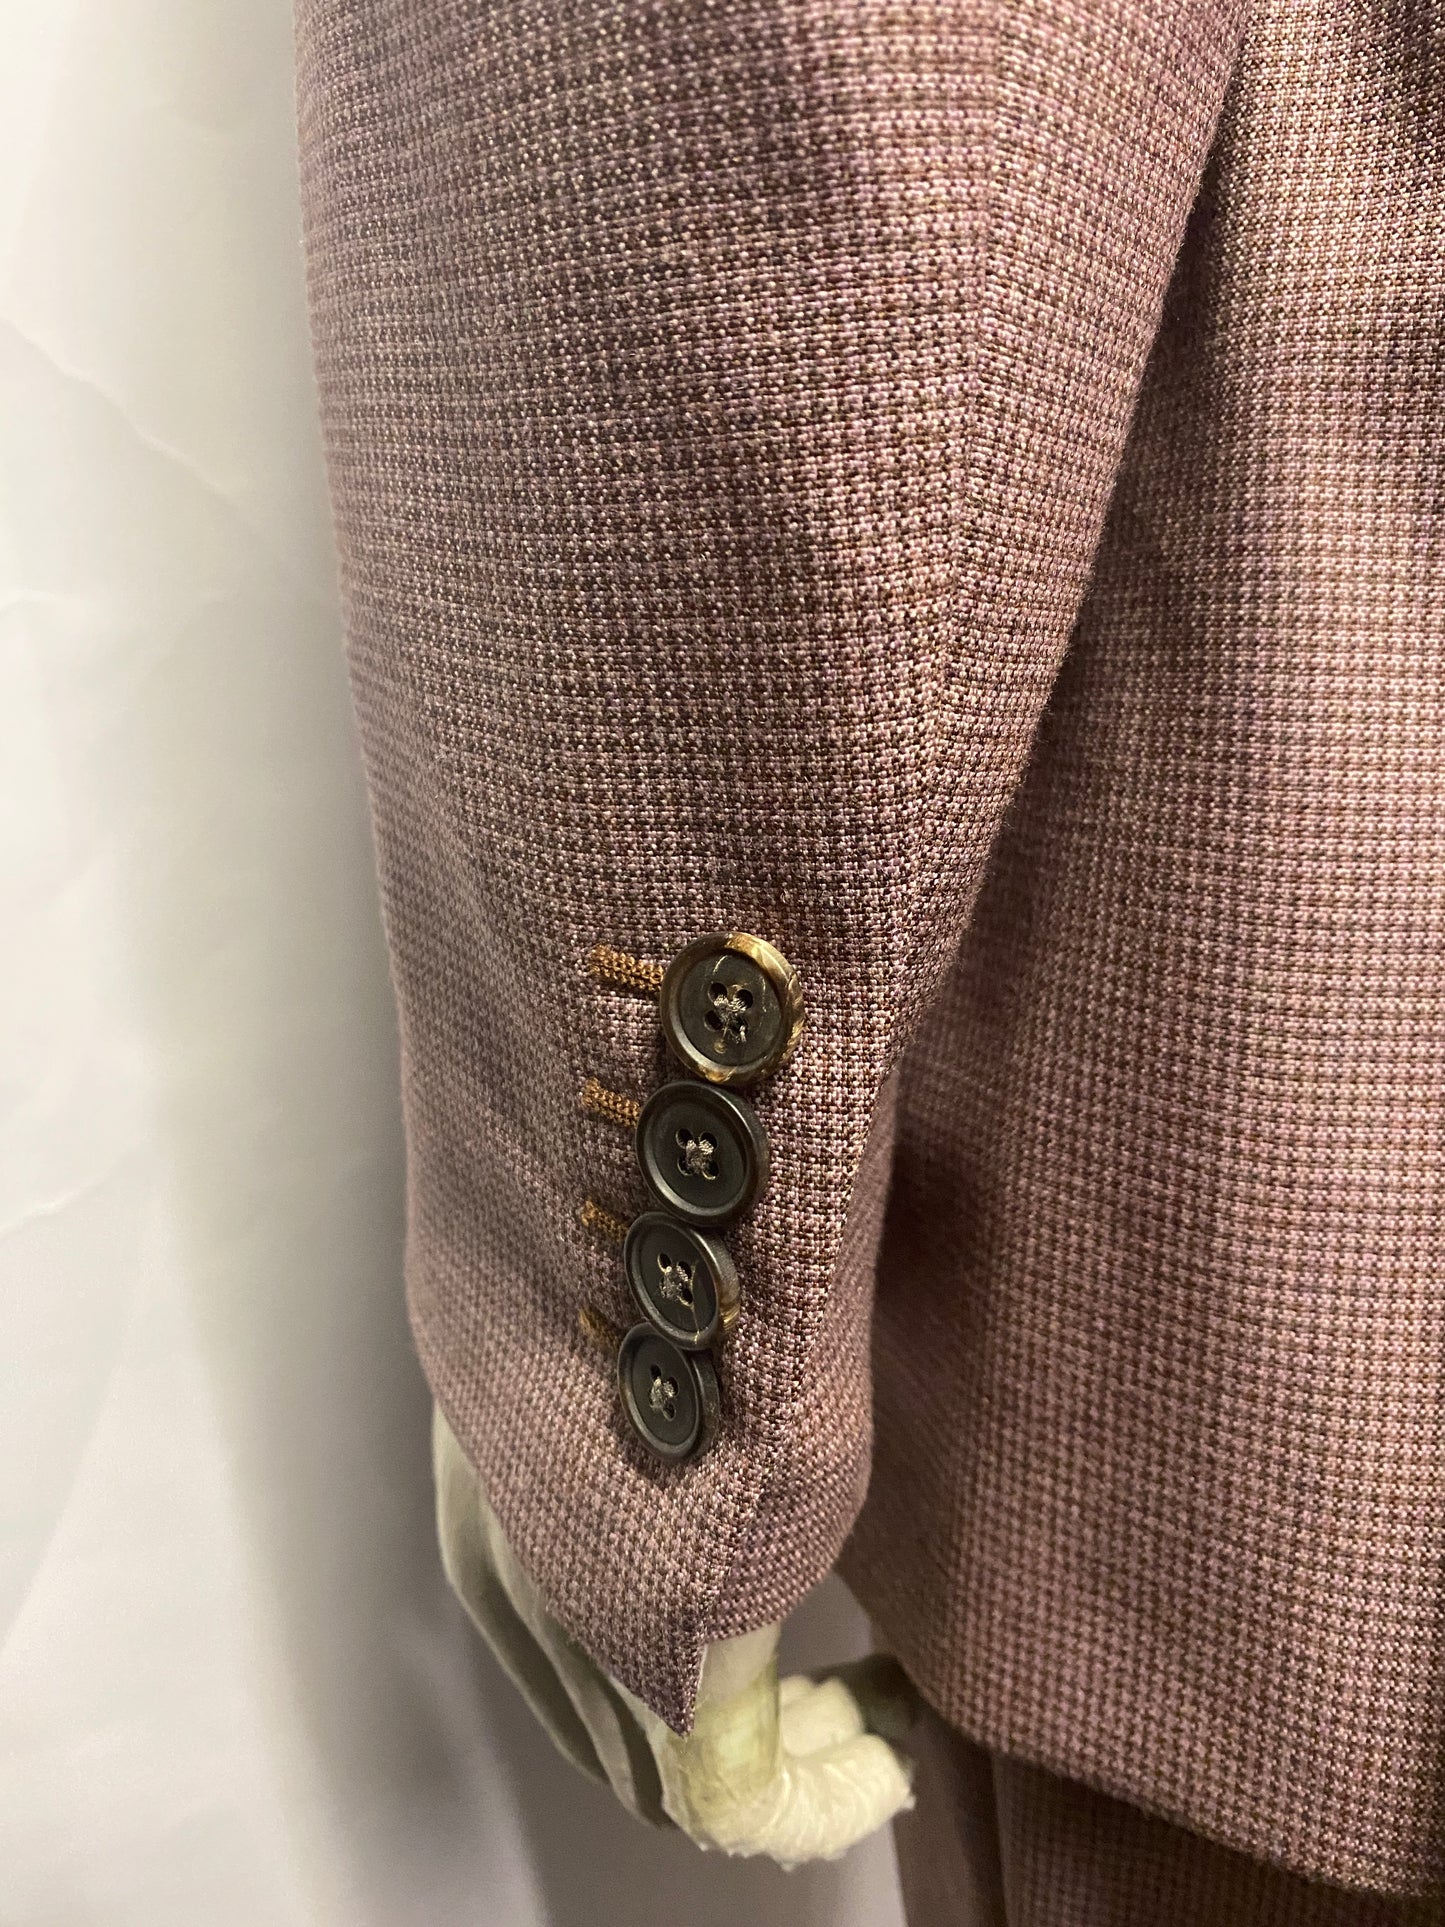 Gieves and Hawkes Pink Houndstooth Wool Suit CH42